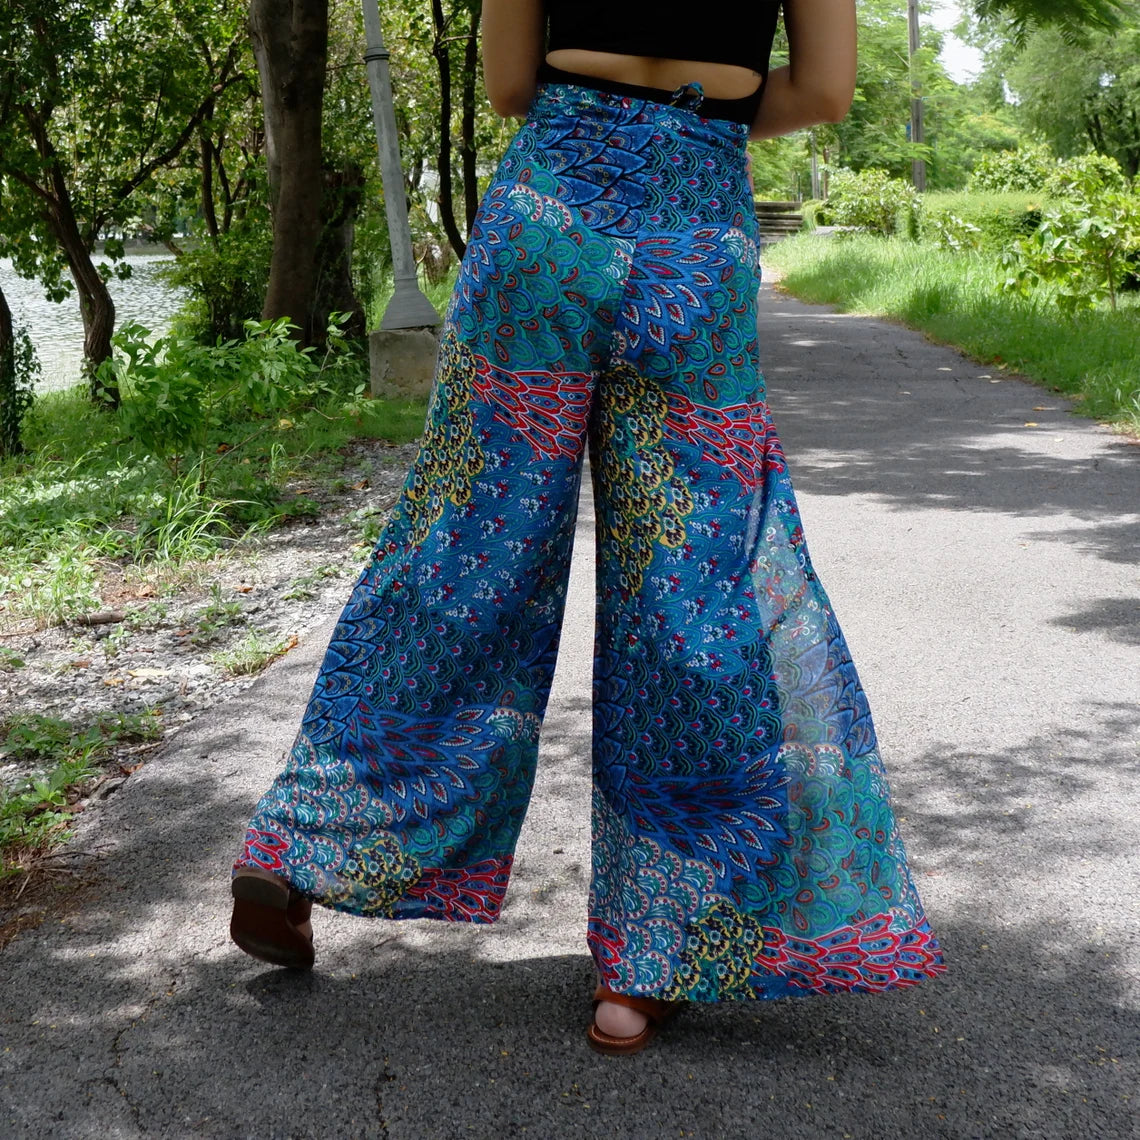 Fashionable boho wrap pants with a striking blue petals print, perfect for a relaxed yet chic look.